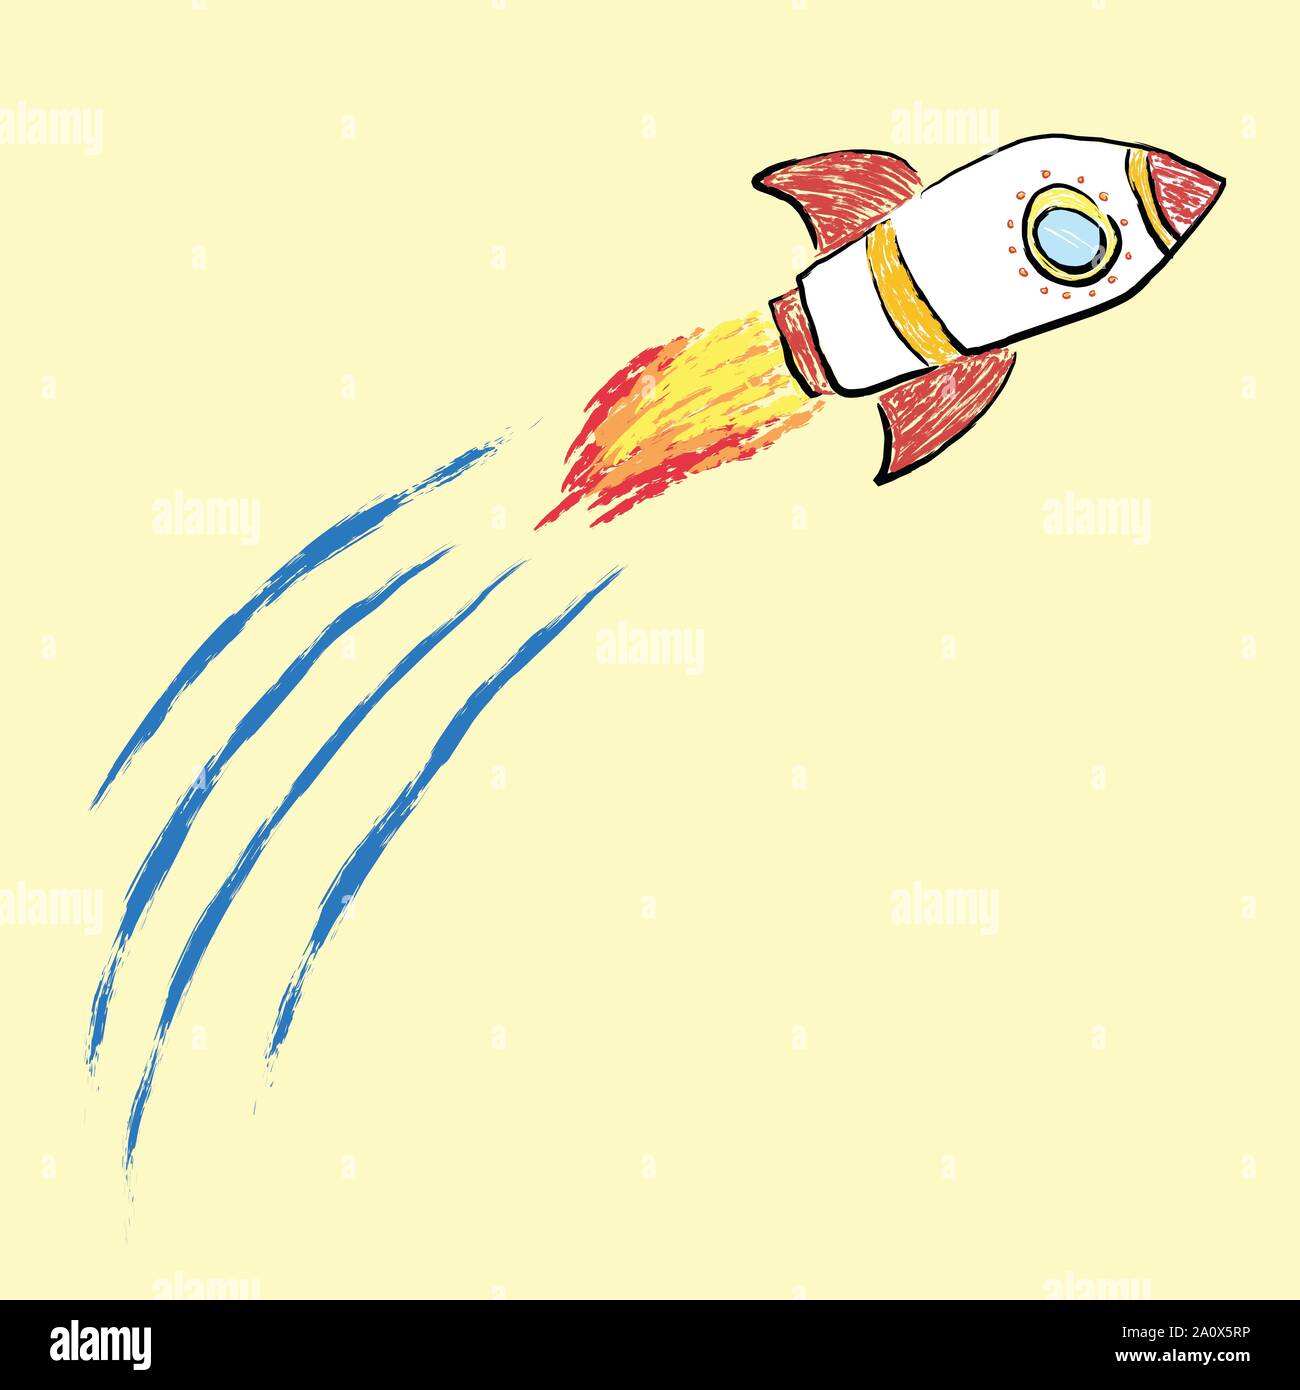 Rocket Flying Doodle Crayon Style Drawing Stock Vector